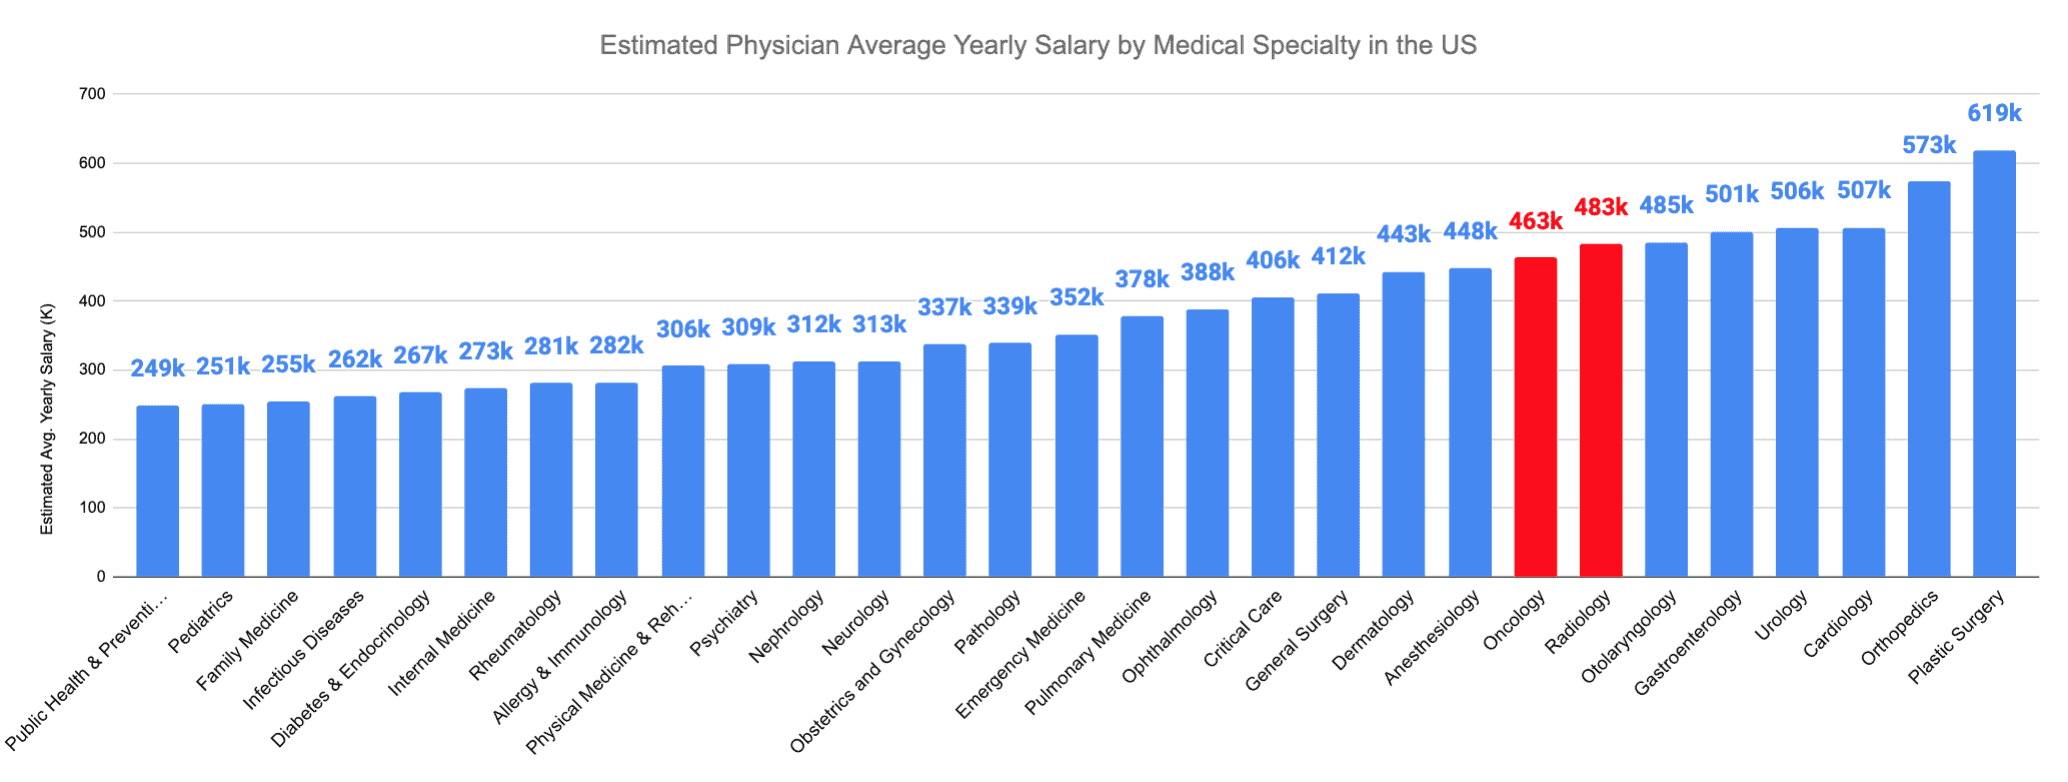 Radiology vs. Hematology and Oncology Estimated Physician Average Yearly Salary by Medical Specialty in the US